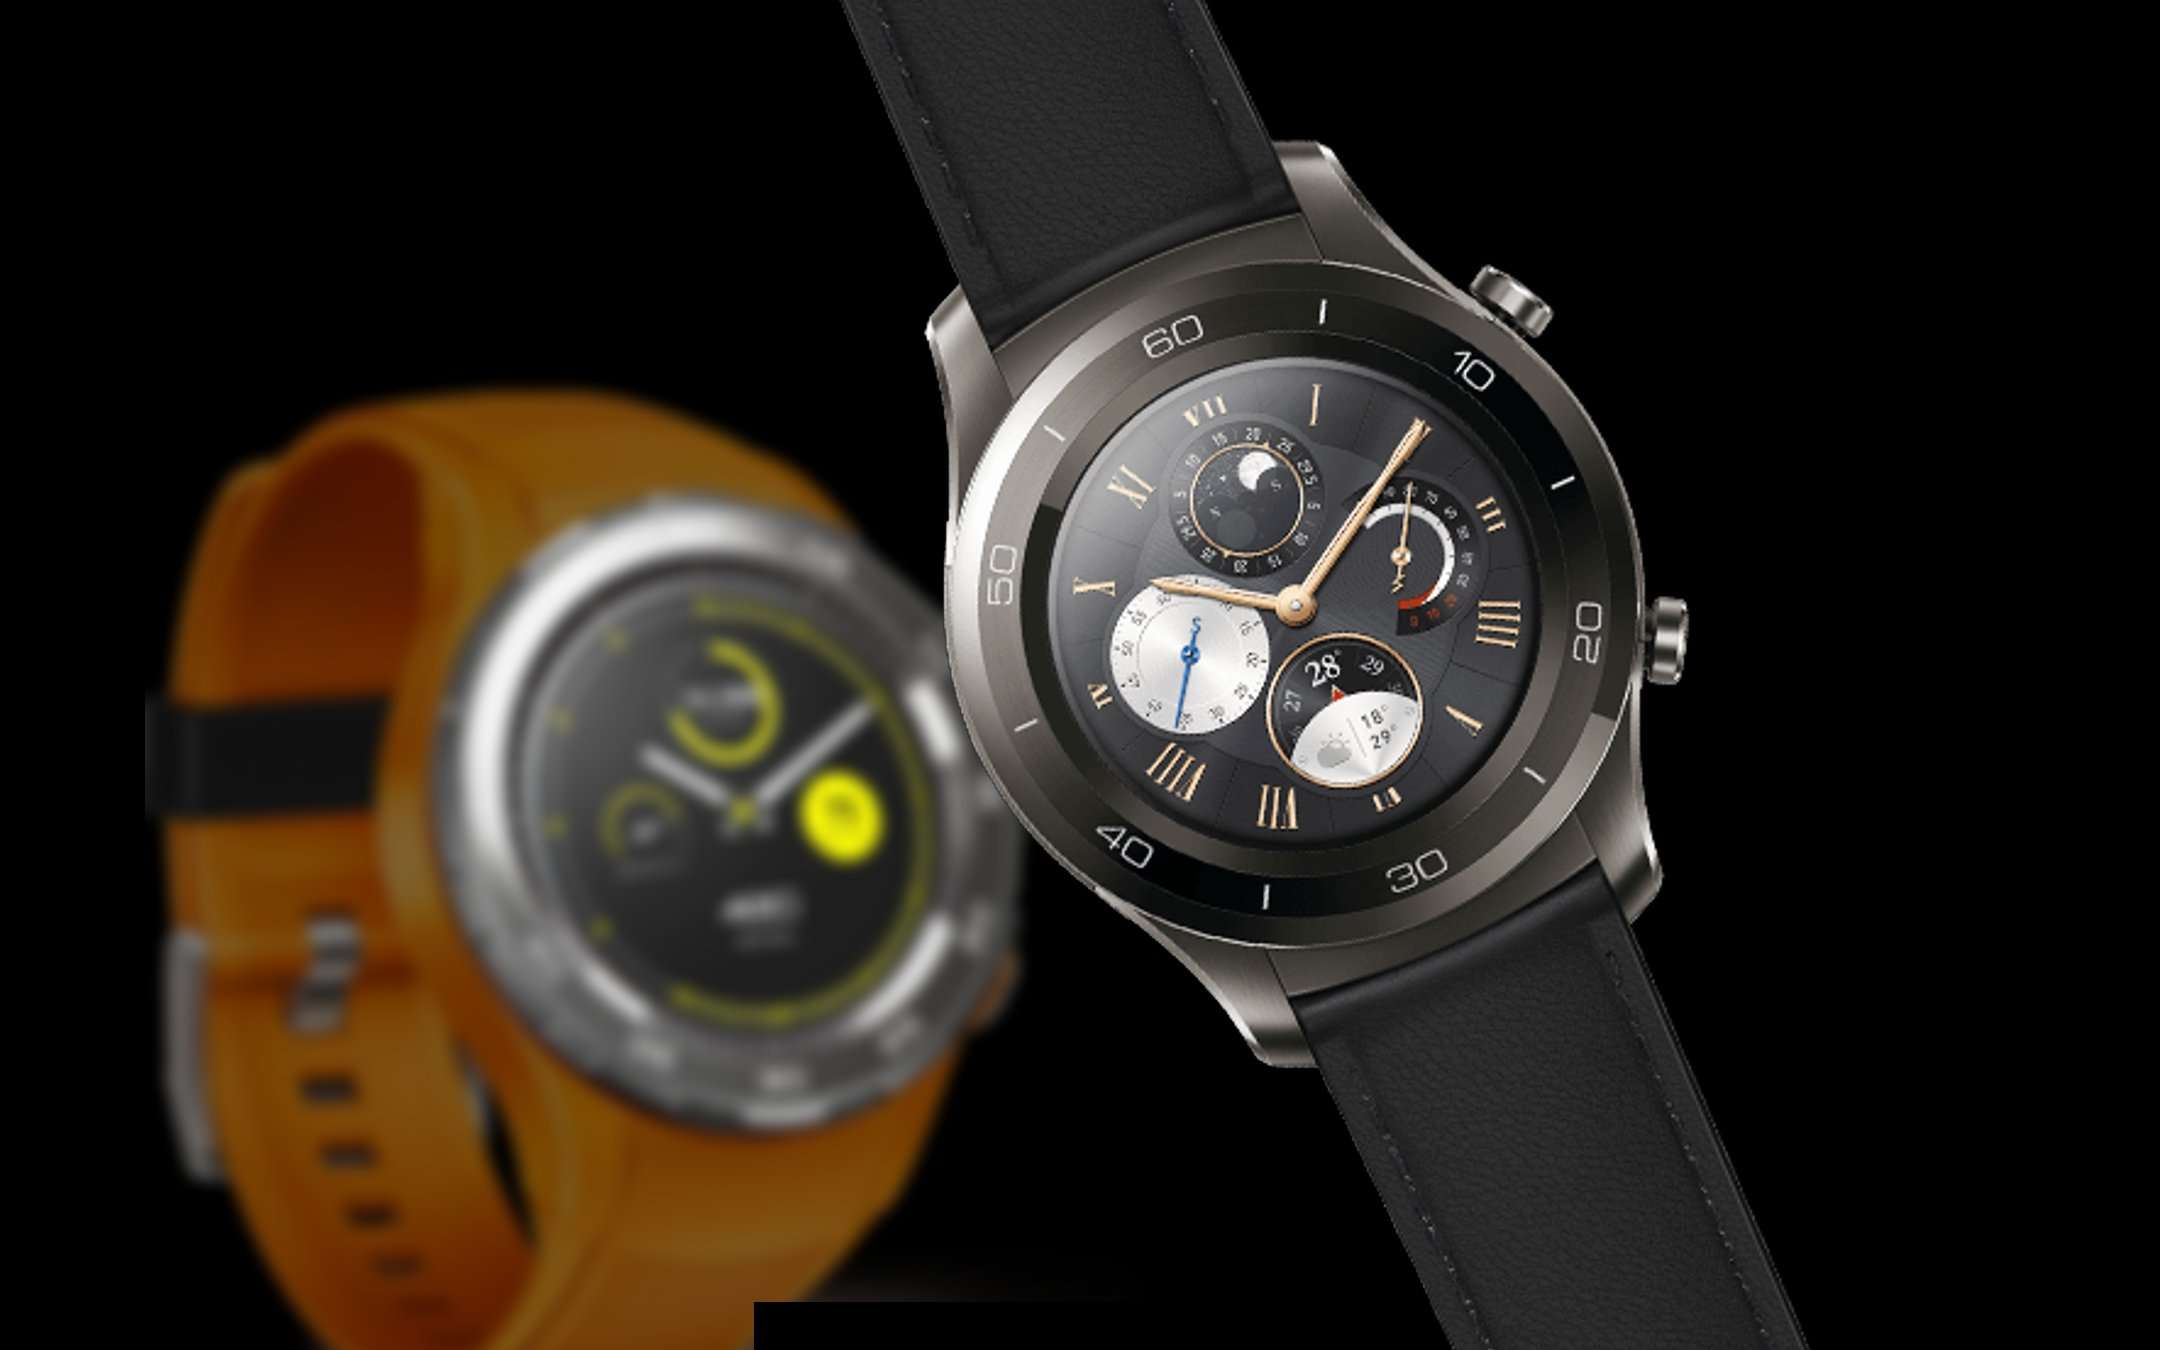 Huawei Watch, pronto l'update ad Android Wear 2.0